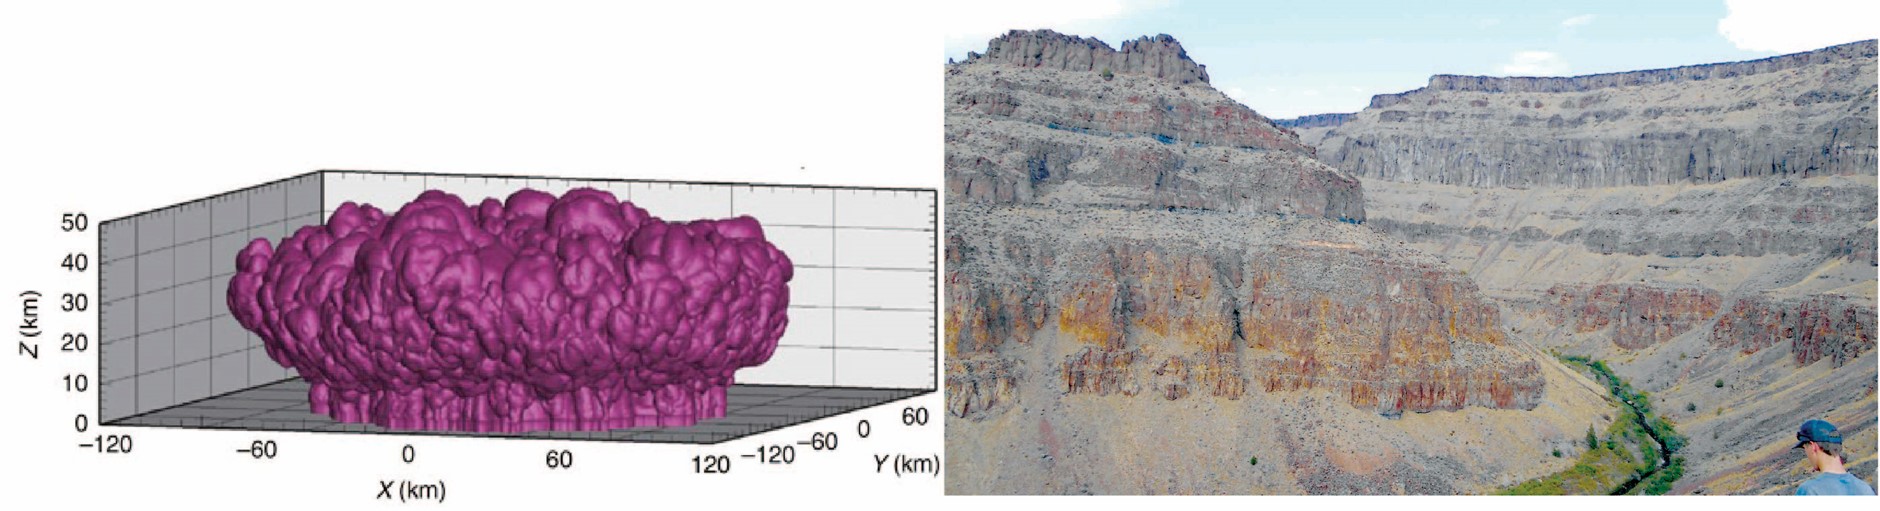 Graph of super eruption on left, photo of volcanic rocks on right.